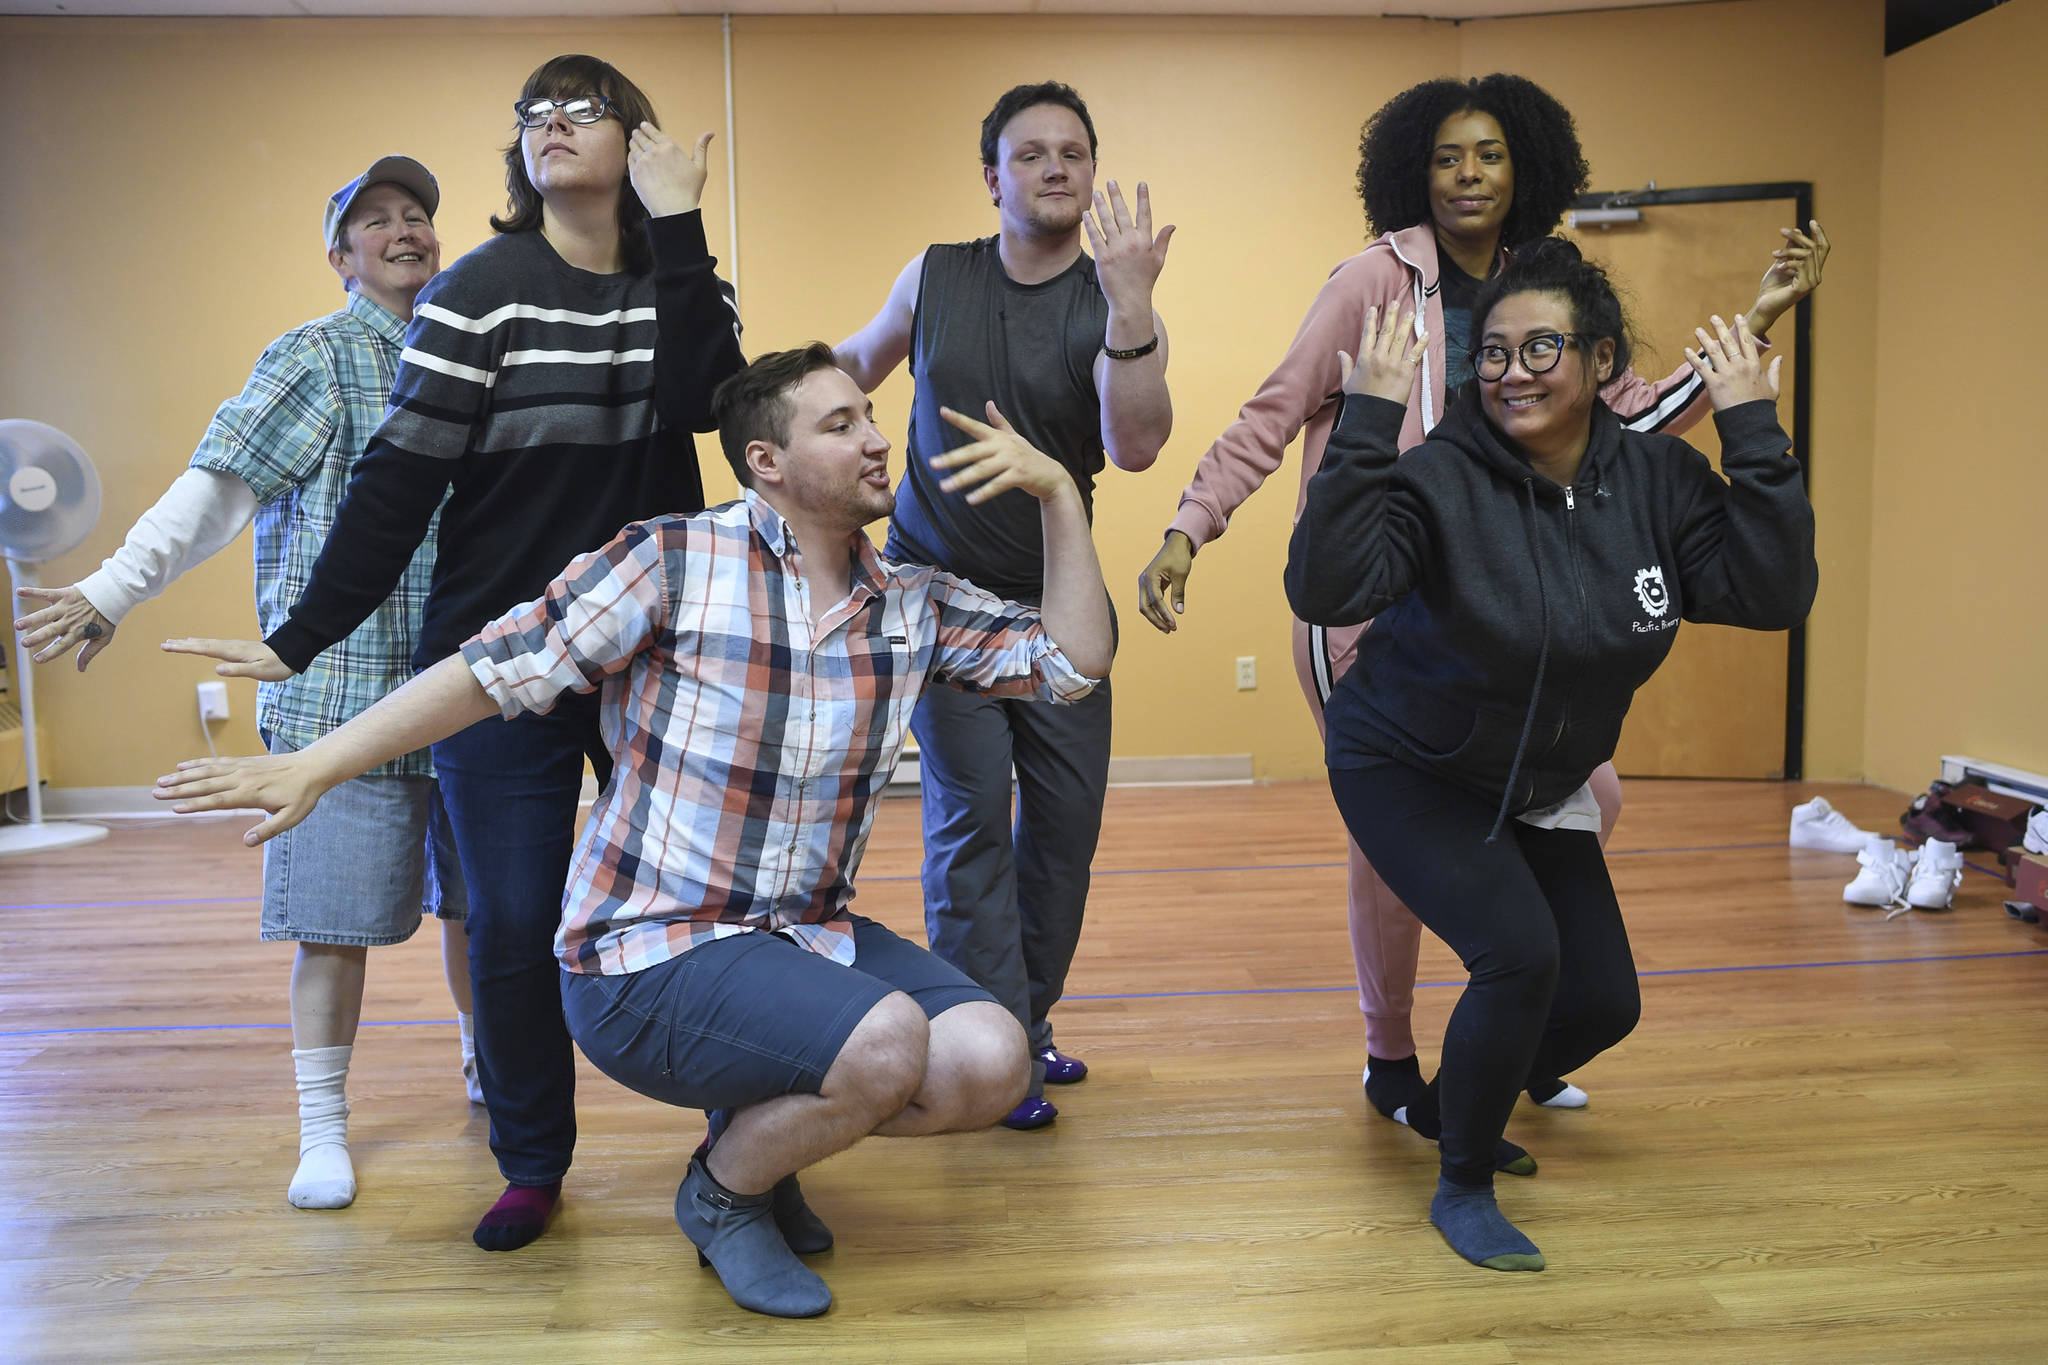 Elaine Bell, left, Heather LaVerne, Richard Carter, Mitchell Leggett, Tahir McInnis and Christianne Carrillo, right, practice for the the fifth annual GLITZ Drag Show to be held at Centennial Hall on Friday and Saturday, June 15 and 16. (Michael Penn | Juneau Empire)